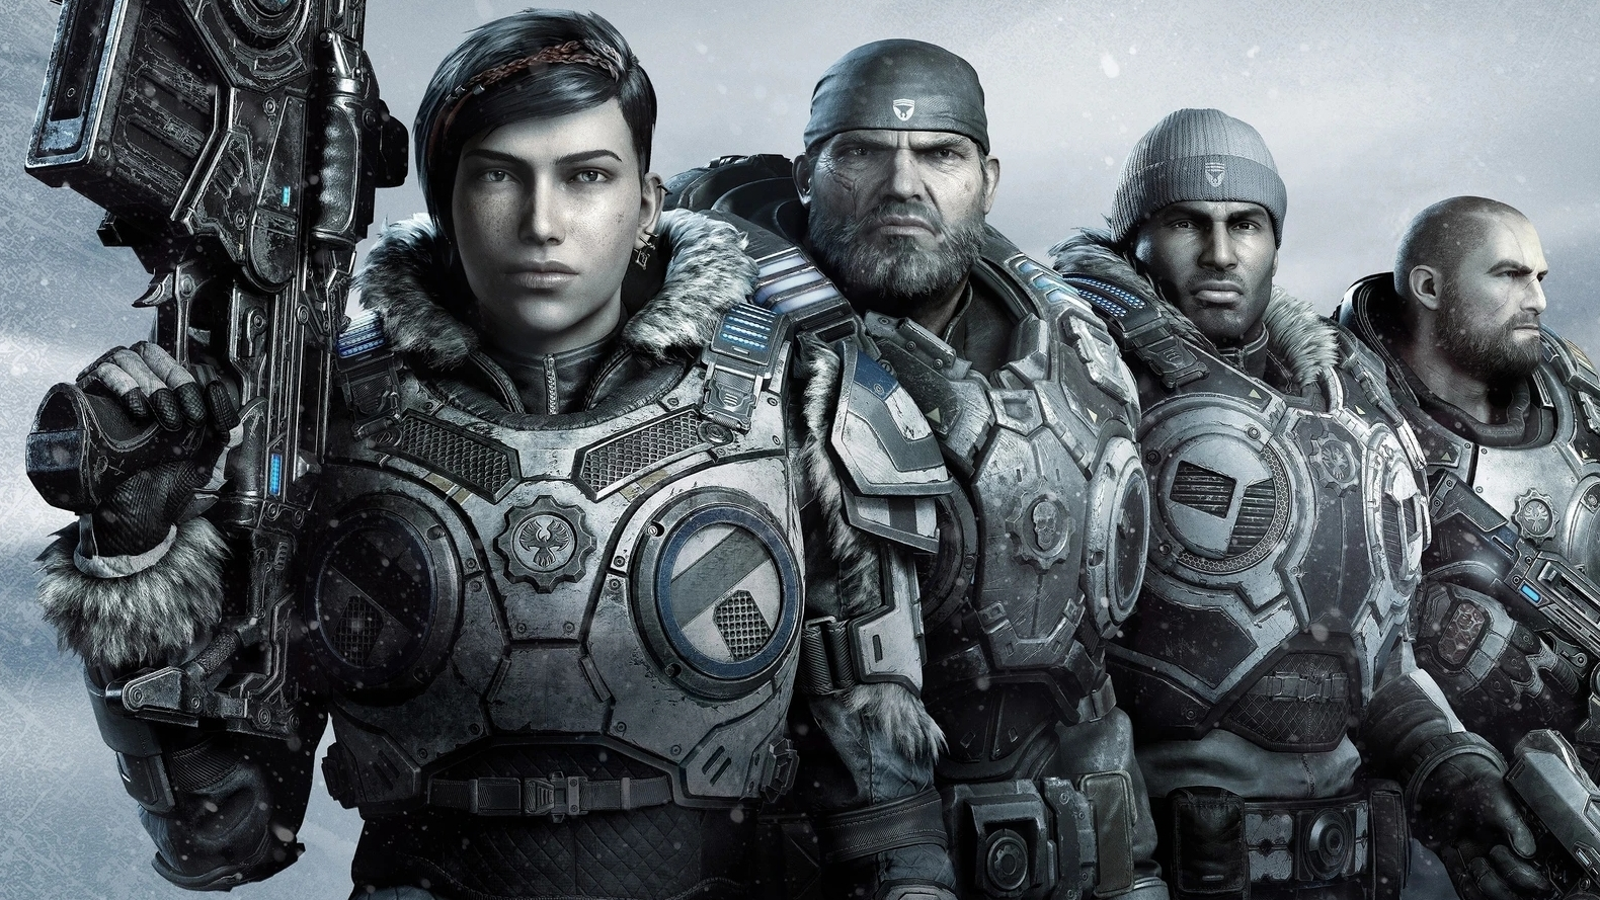 The making of Gears 5: how the Coalition hit 60fps - and improved